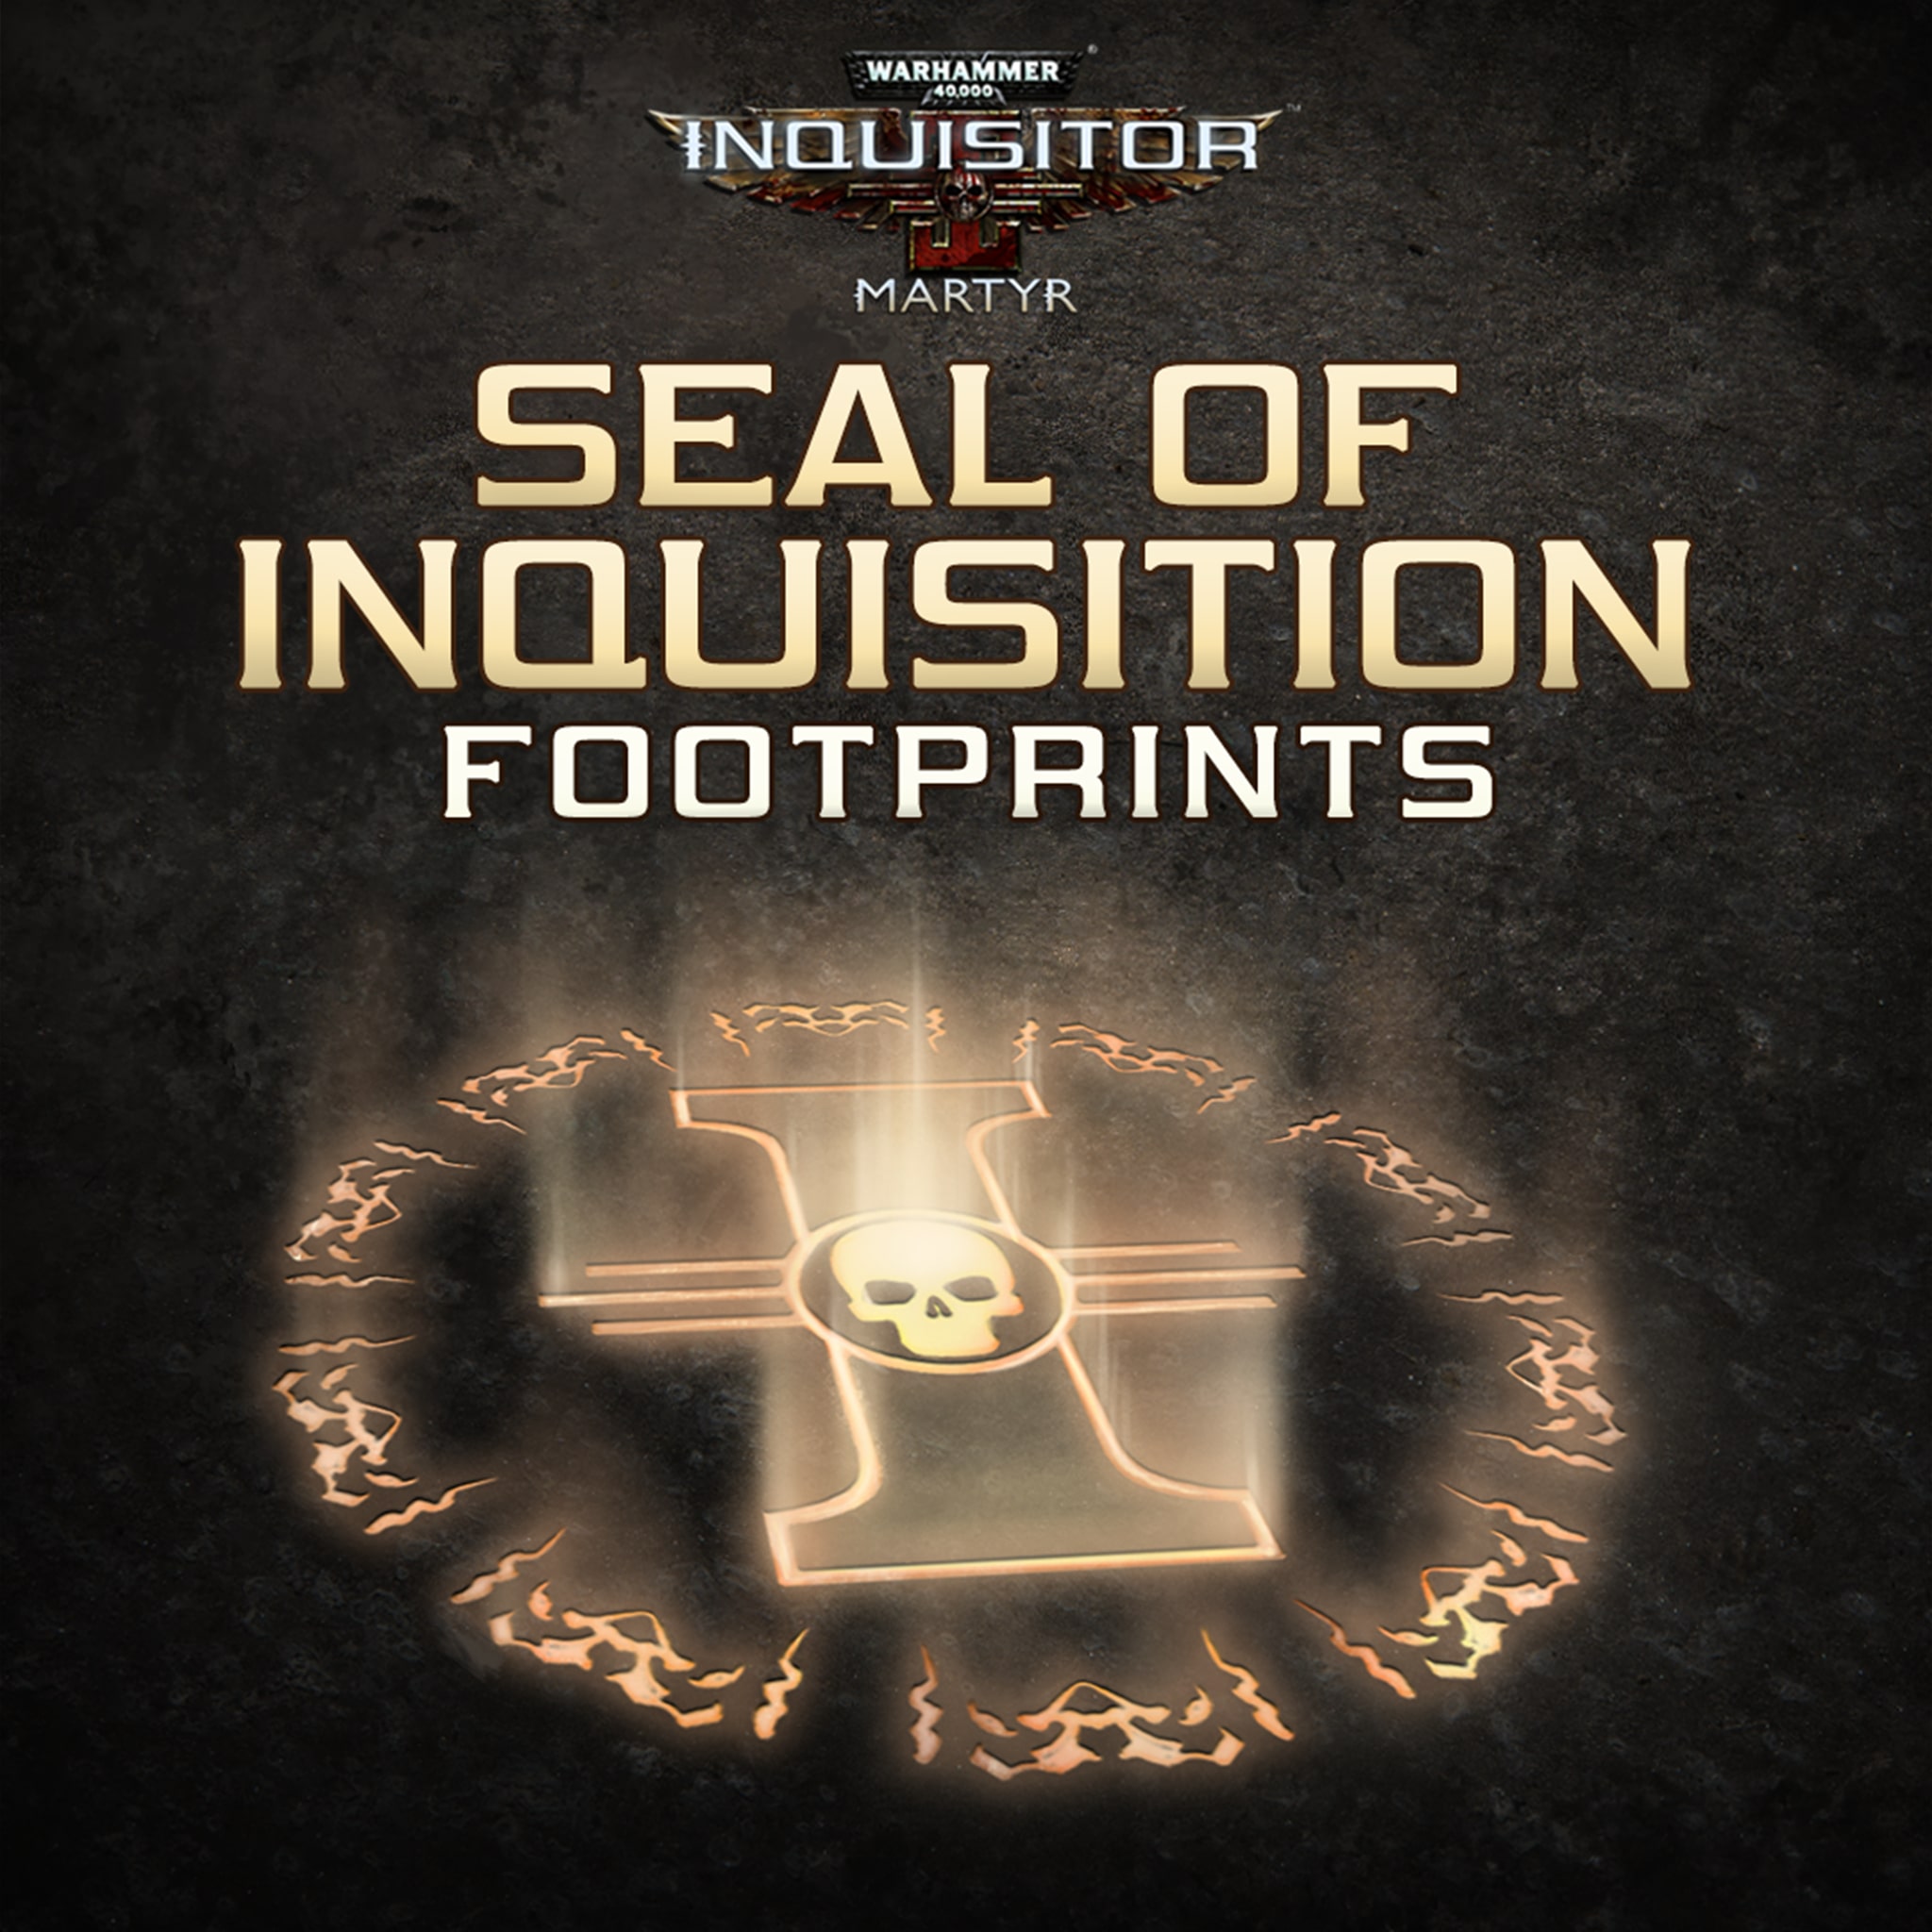 Warhammer 40,000: Inquisitor - Seal of Inquisition Footprint